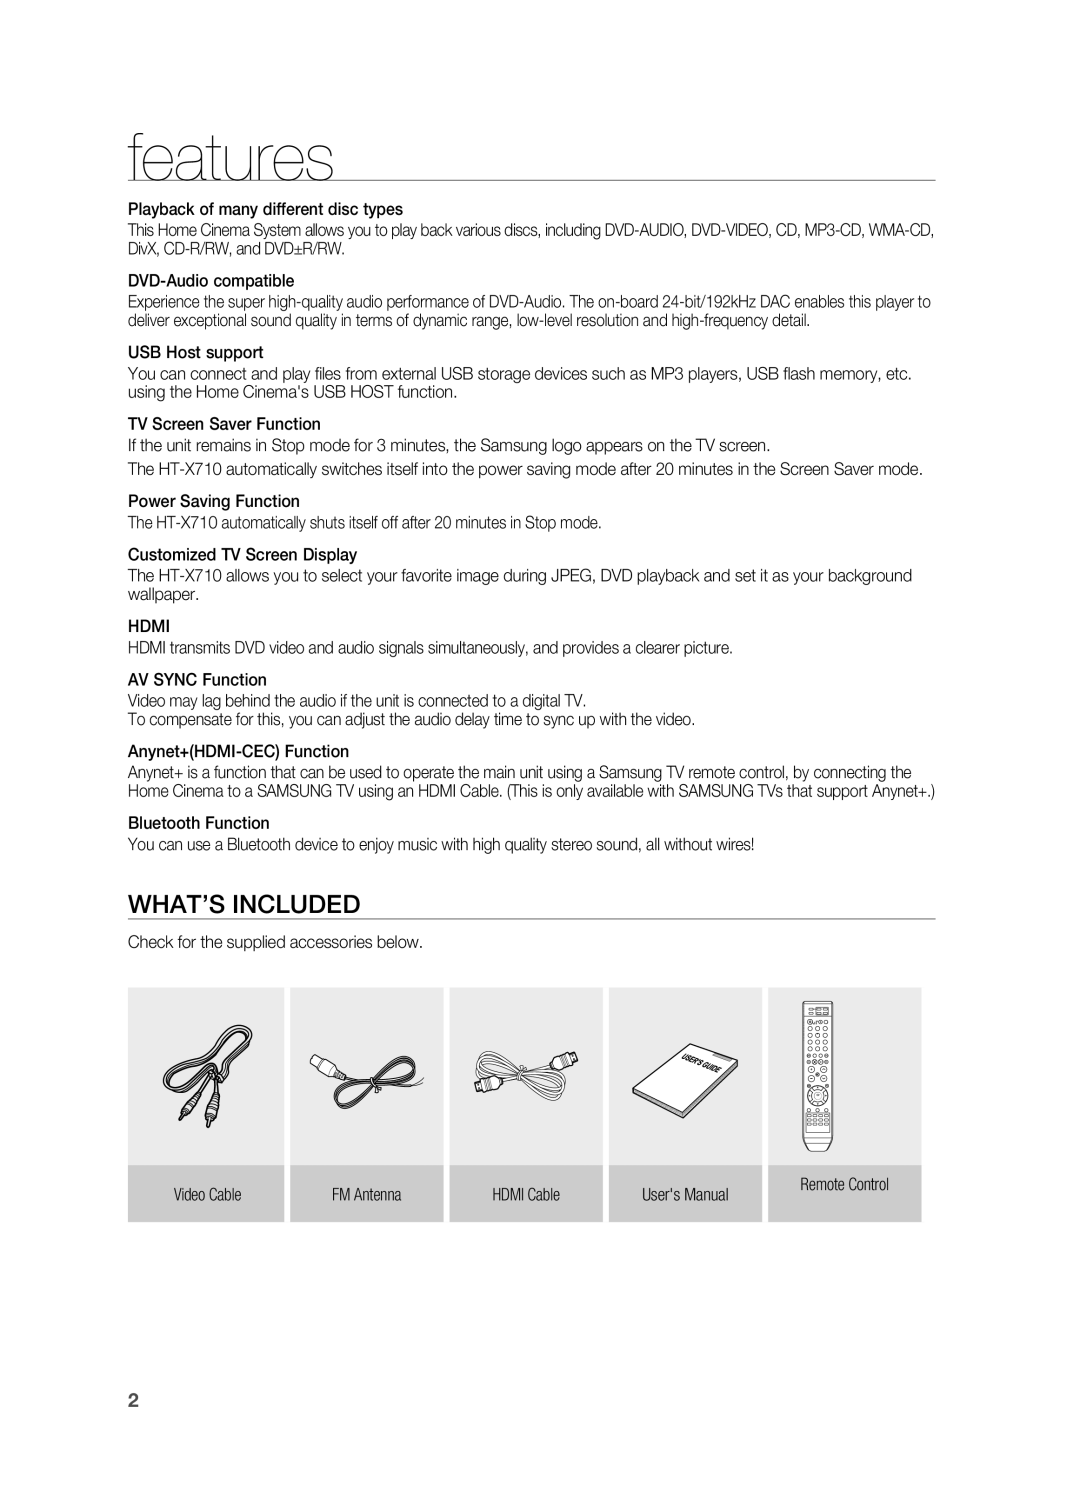 Samsung HT-X710 user manual features, What’s included 